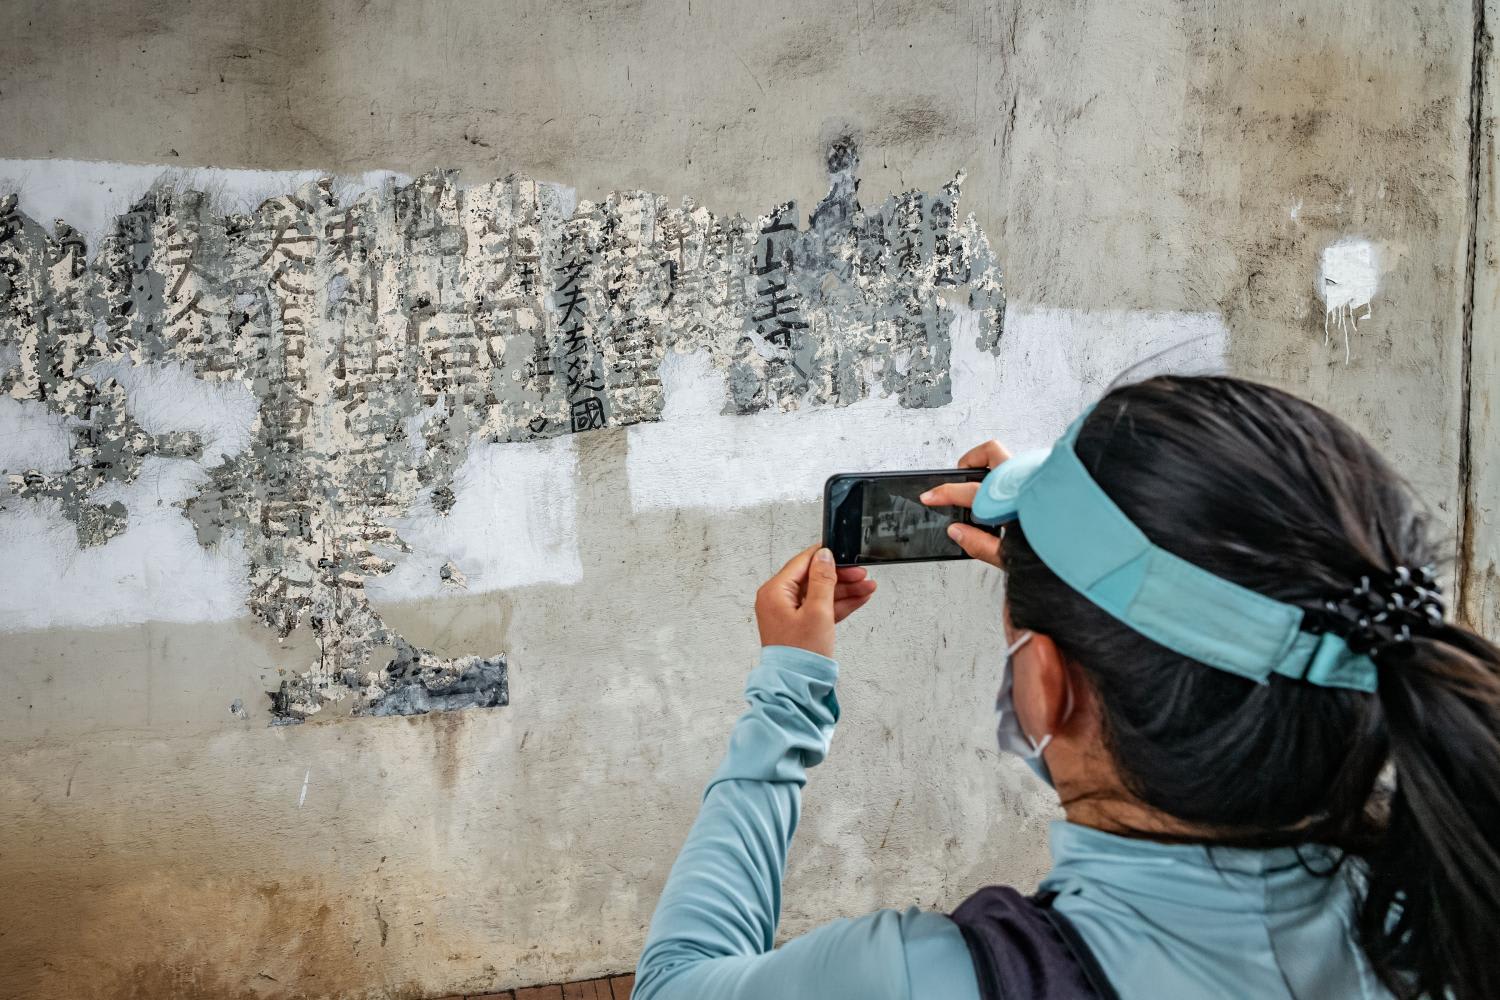 <p>A woman takes a photograph of some of the newly discovered work of the graffiti artist Tsang Tsou-choi on a wall under a railway bridge on Boundary Street in Hong Kong on May 28, 2022.</p>
